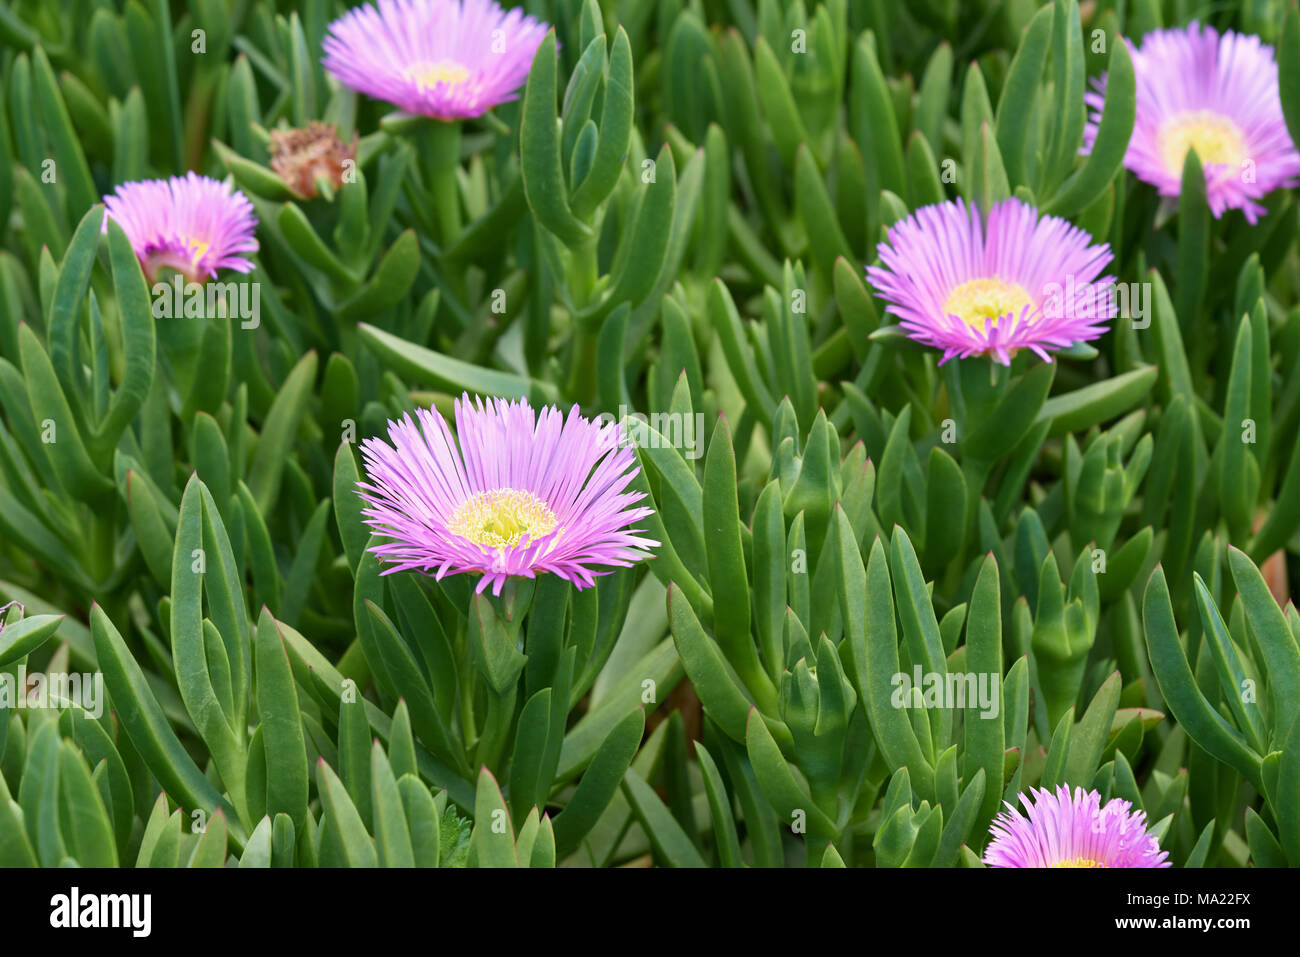 Carpobrotus glaucescens. It is a species of flowering plant in the ice plant family. It is commonly known as angular sea-fig or pigface. Stock Photo